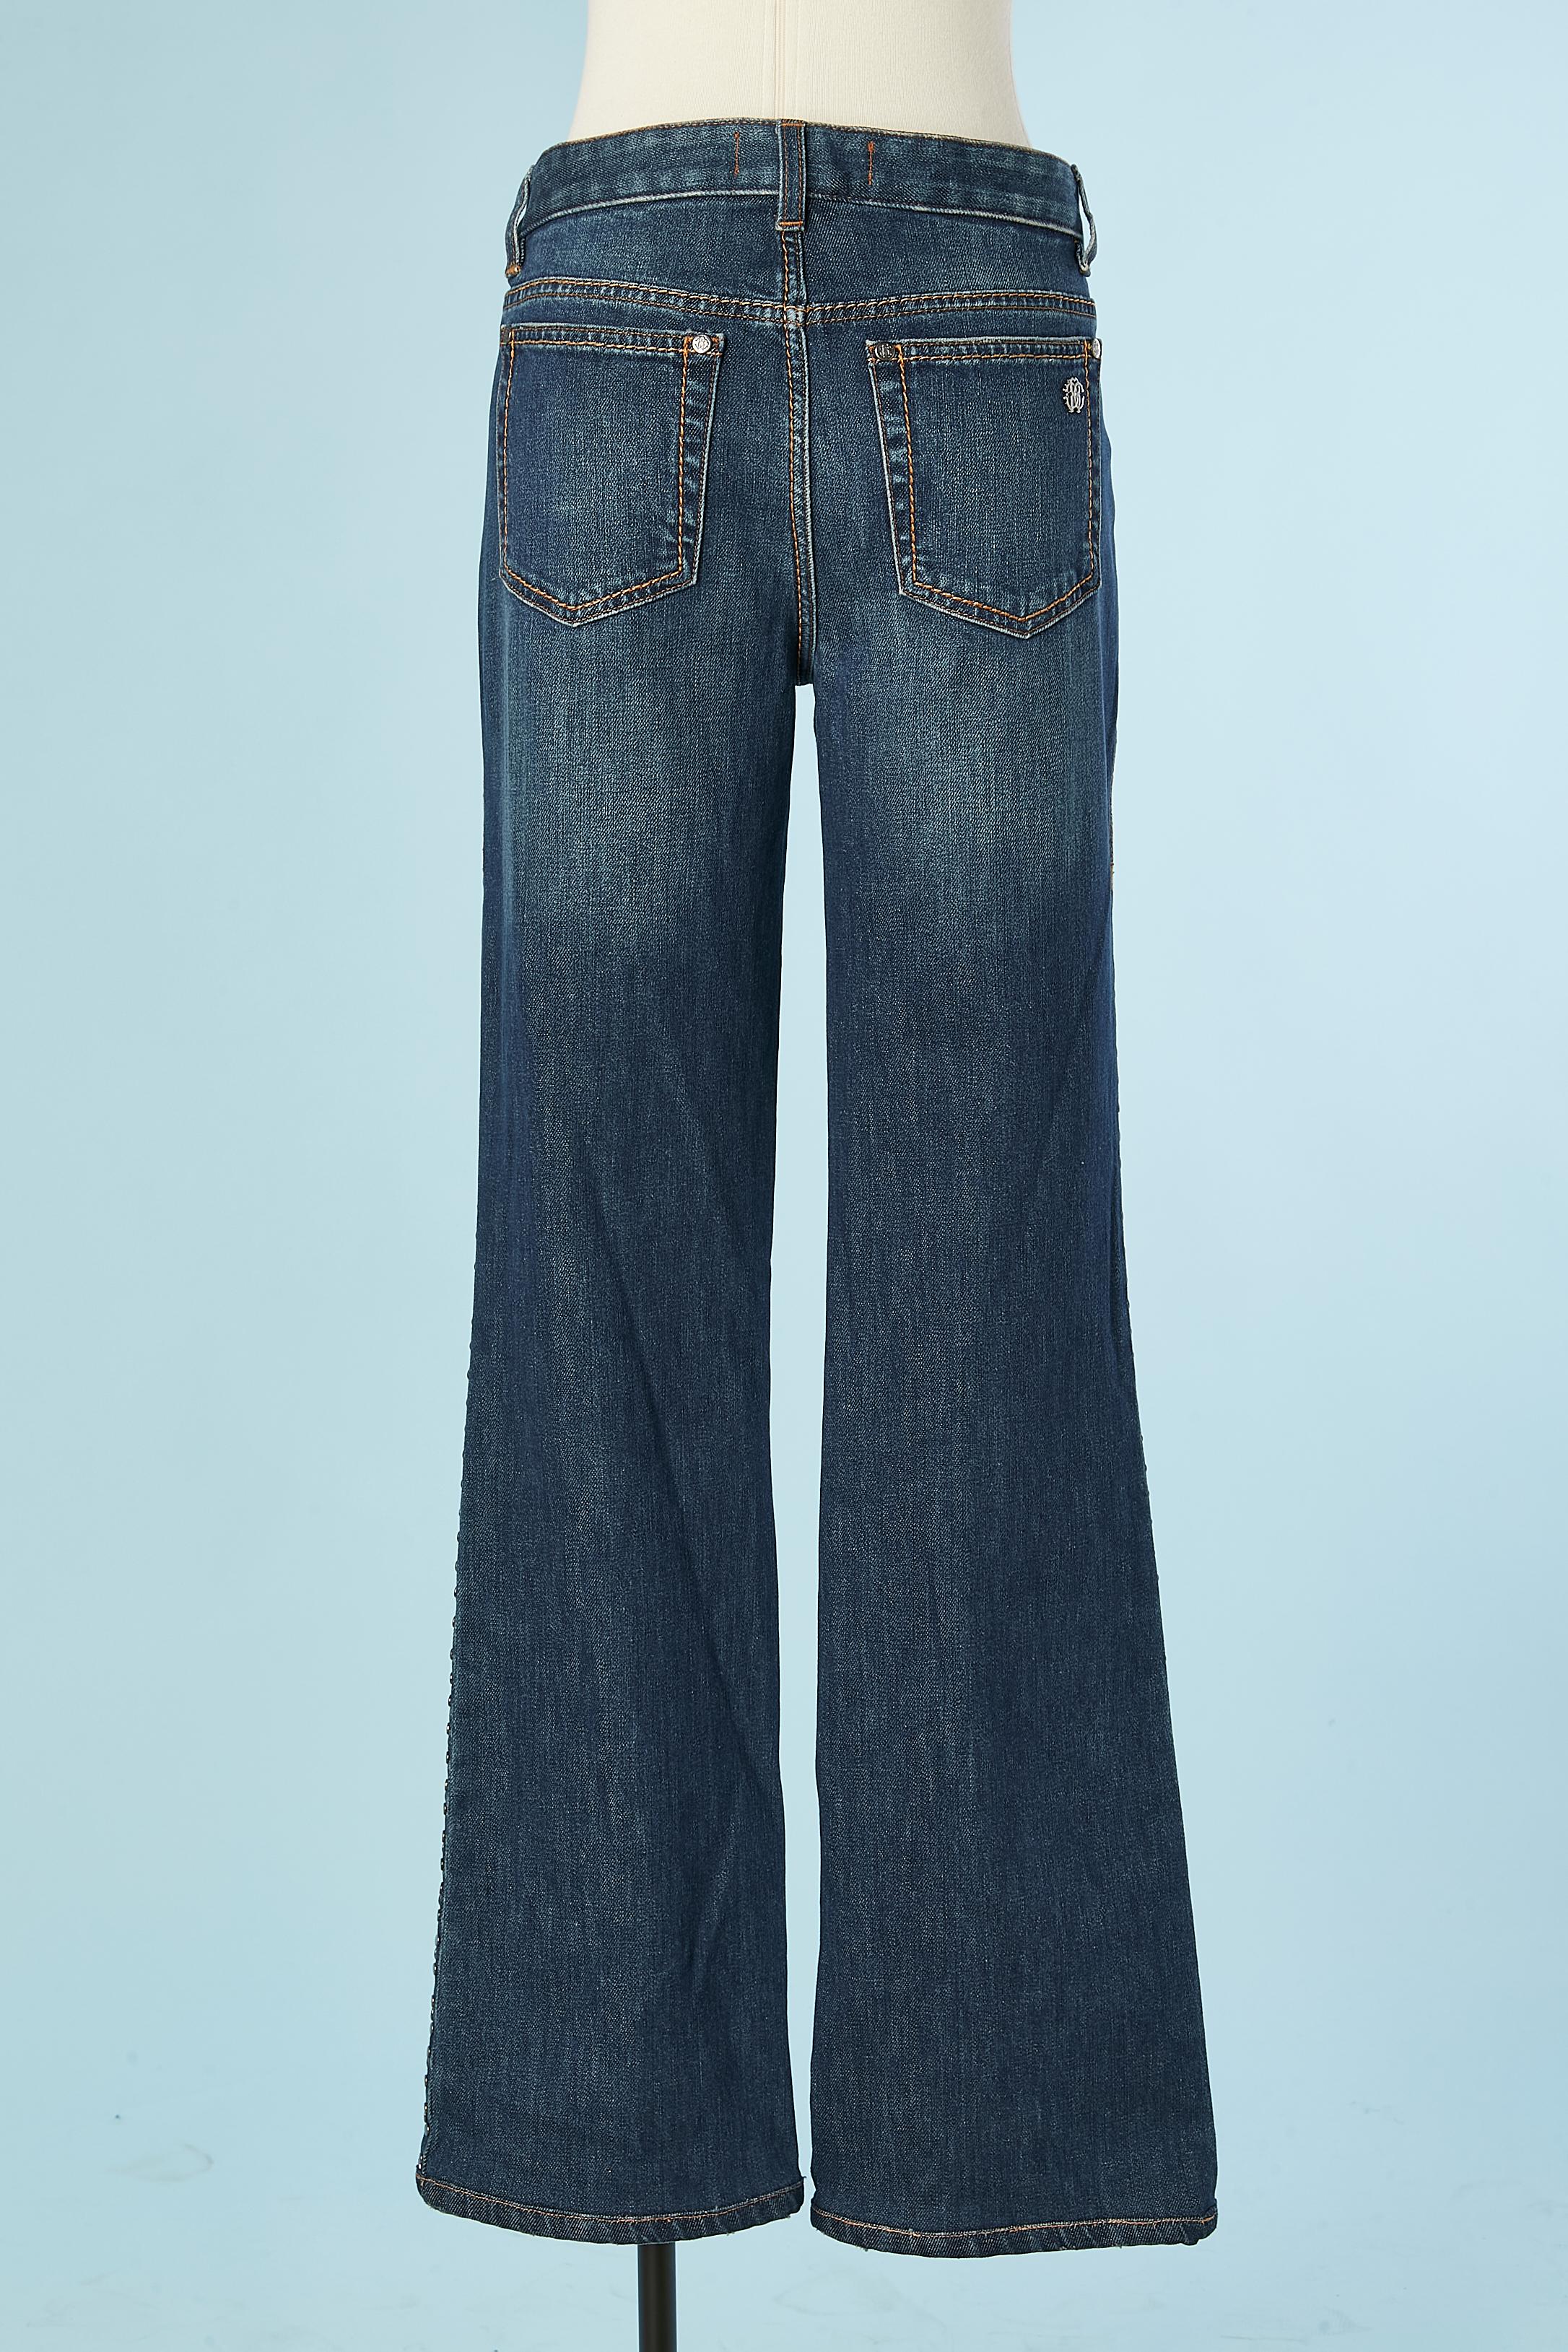 Blue denim jeans with metallic studs and eyelet on the side Roberto Cavalli Men  For Sale 1